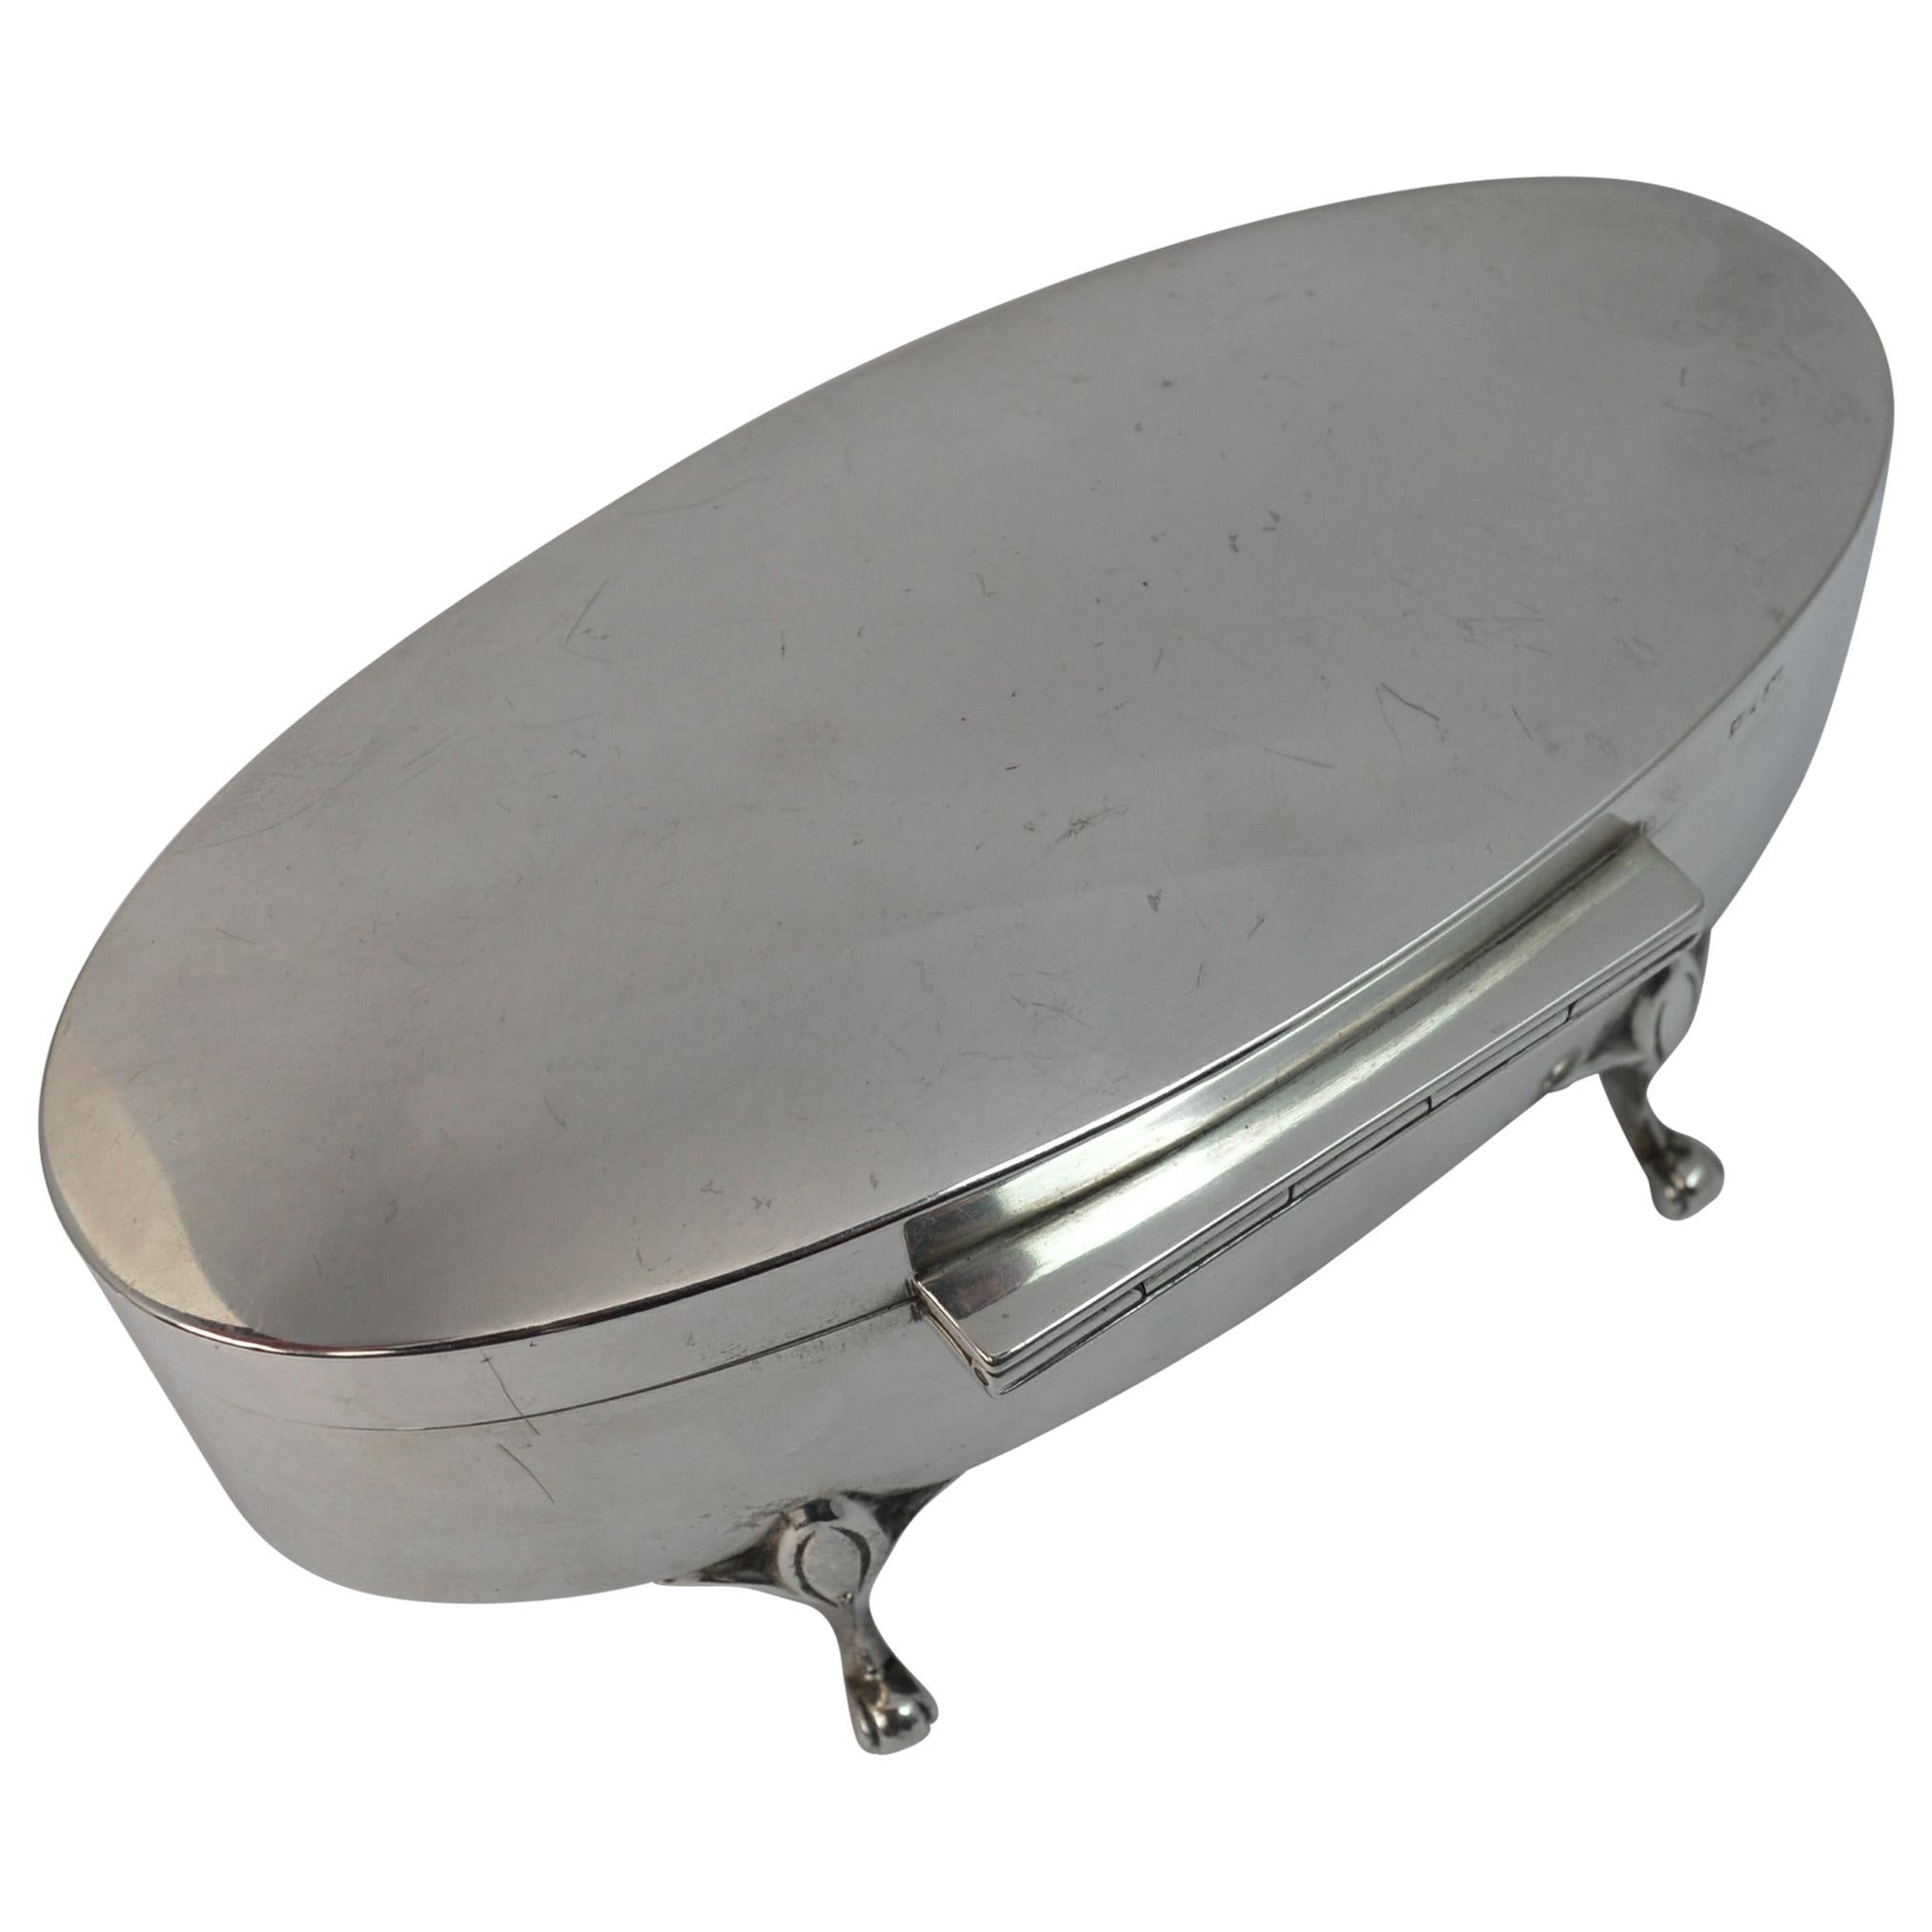 Quality 1921 Walker & Hall Solid Silver Oval Jewellery Box